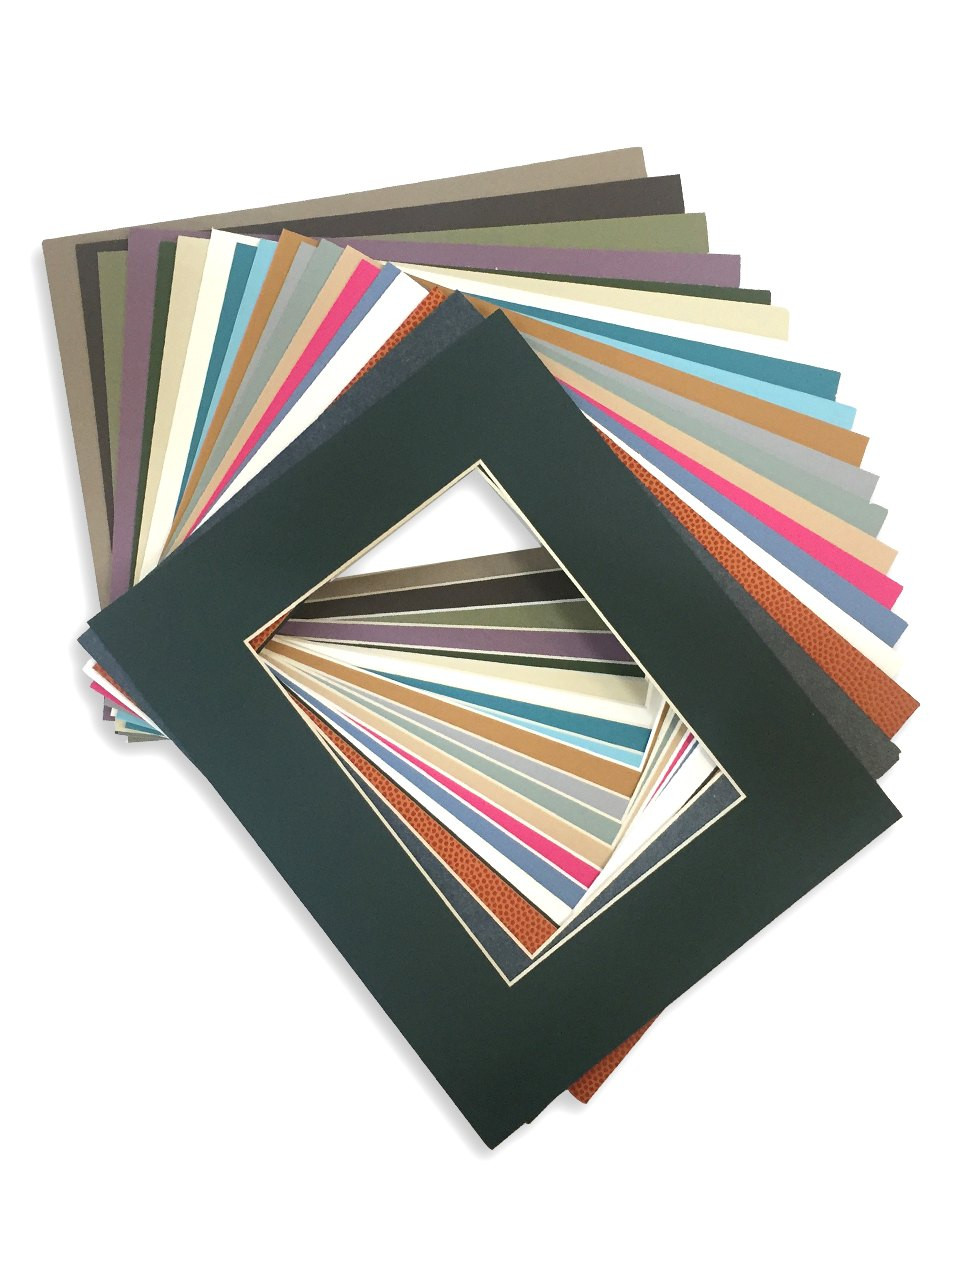 11x14 Mats for 8x10 photos - 25 Variety Pack